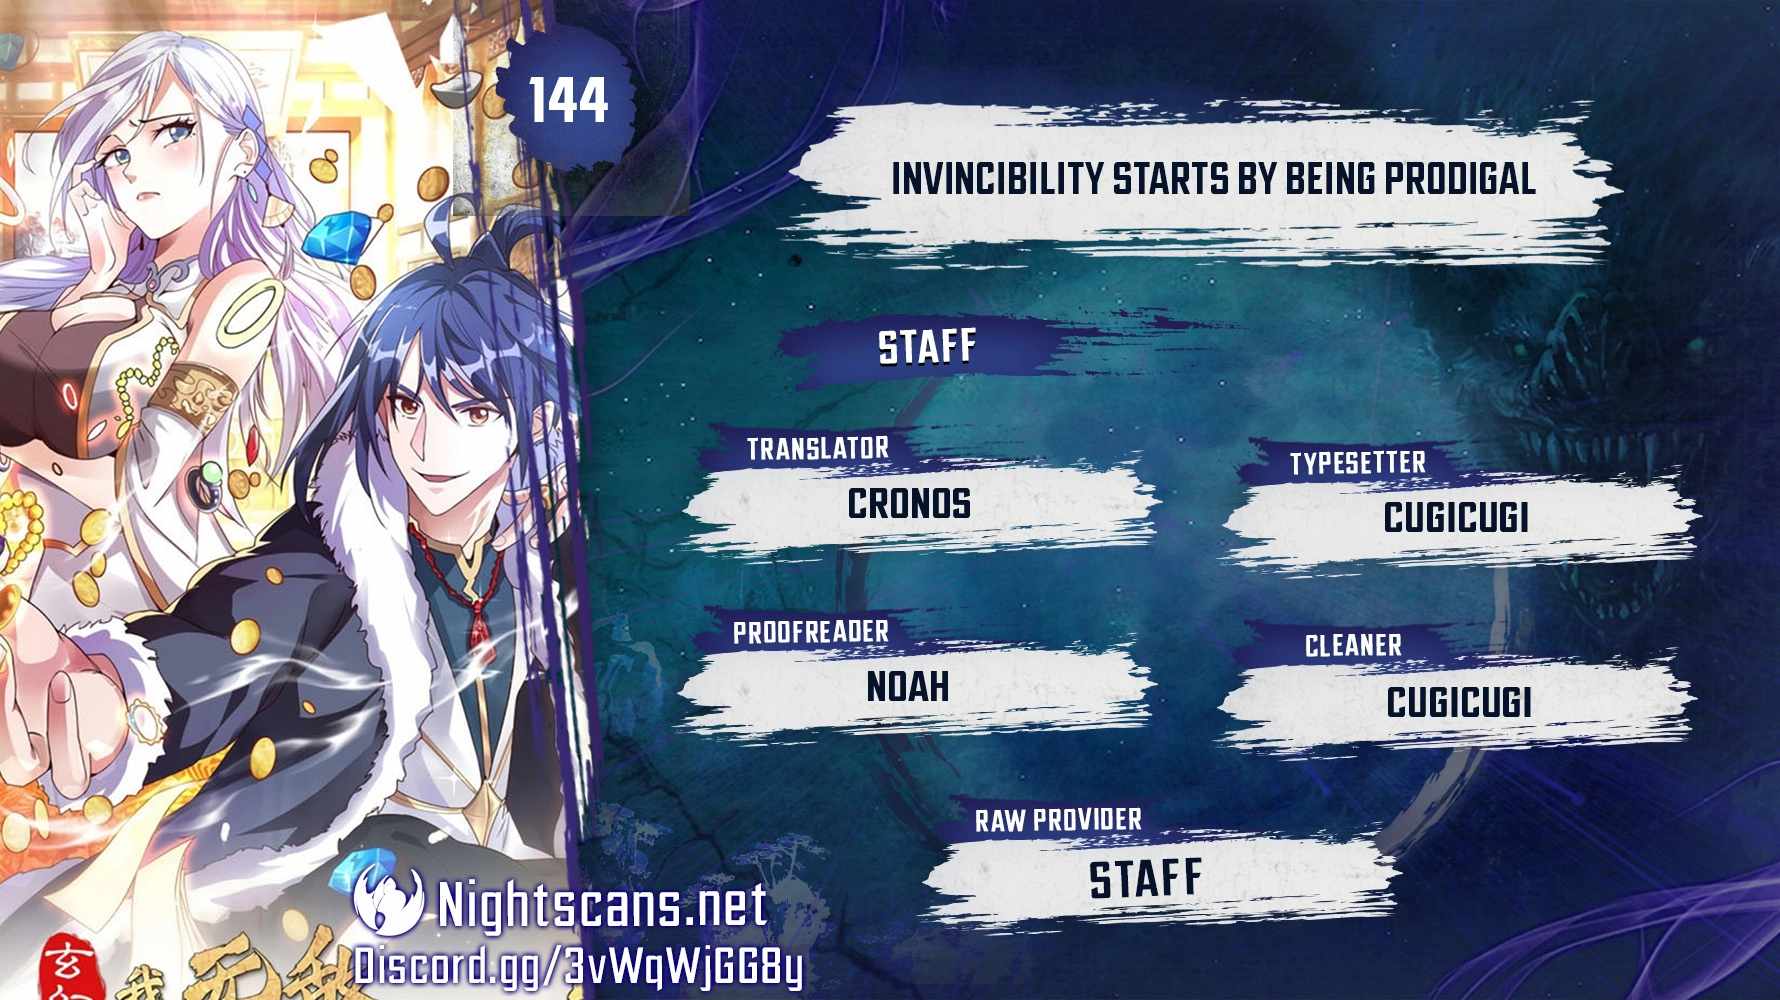 Fusion Fantasy: I, Invincibility Starting As The Prodigal! Chapter 144 #1